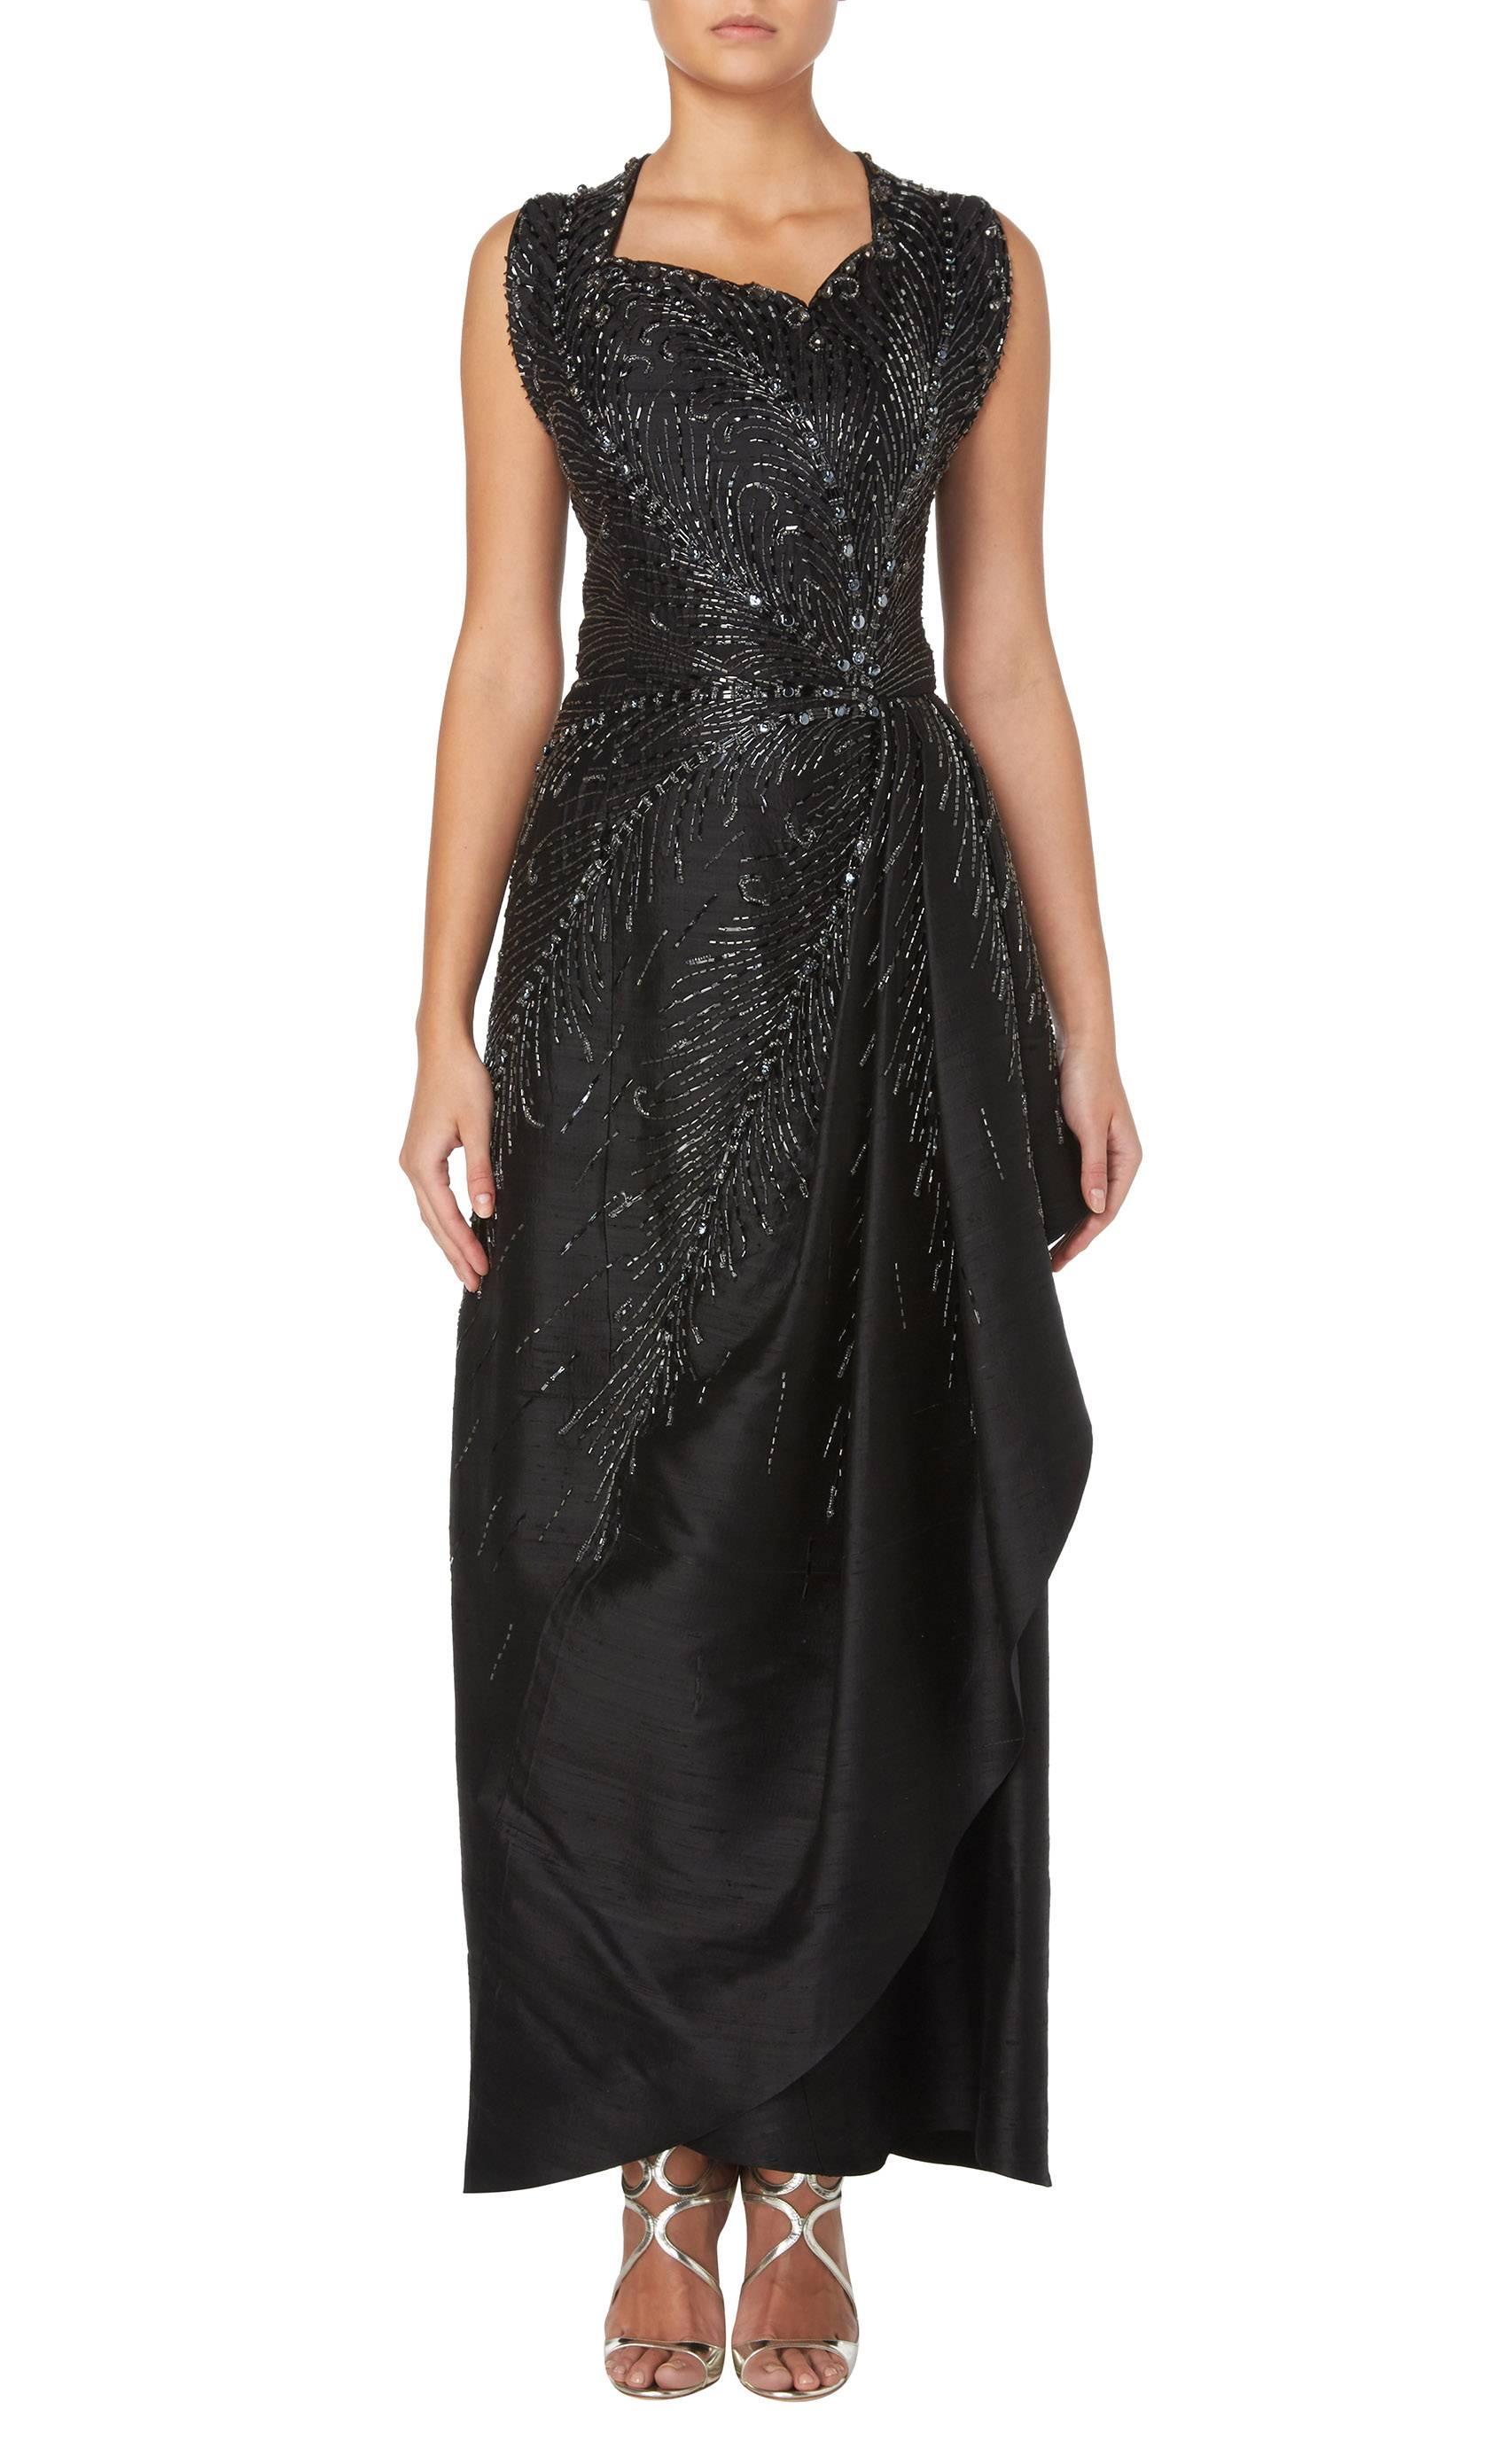 A spectacular piece of haute couture by the Parisian couturier Bruyere, this gown is strikingly modern and darkly glamourous, perfect for a Black Tie or Red Carpet event. Crafted in black raw silk, the dress is entirely covered with finely